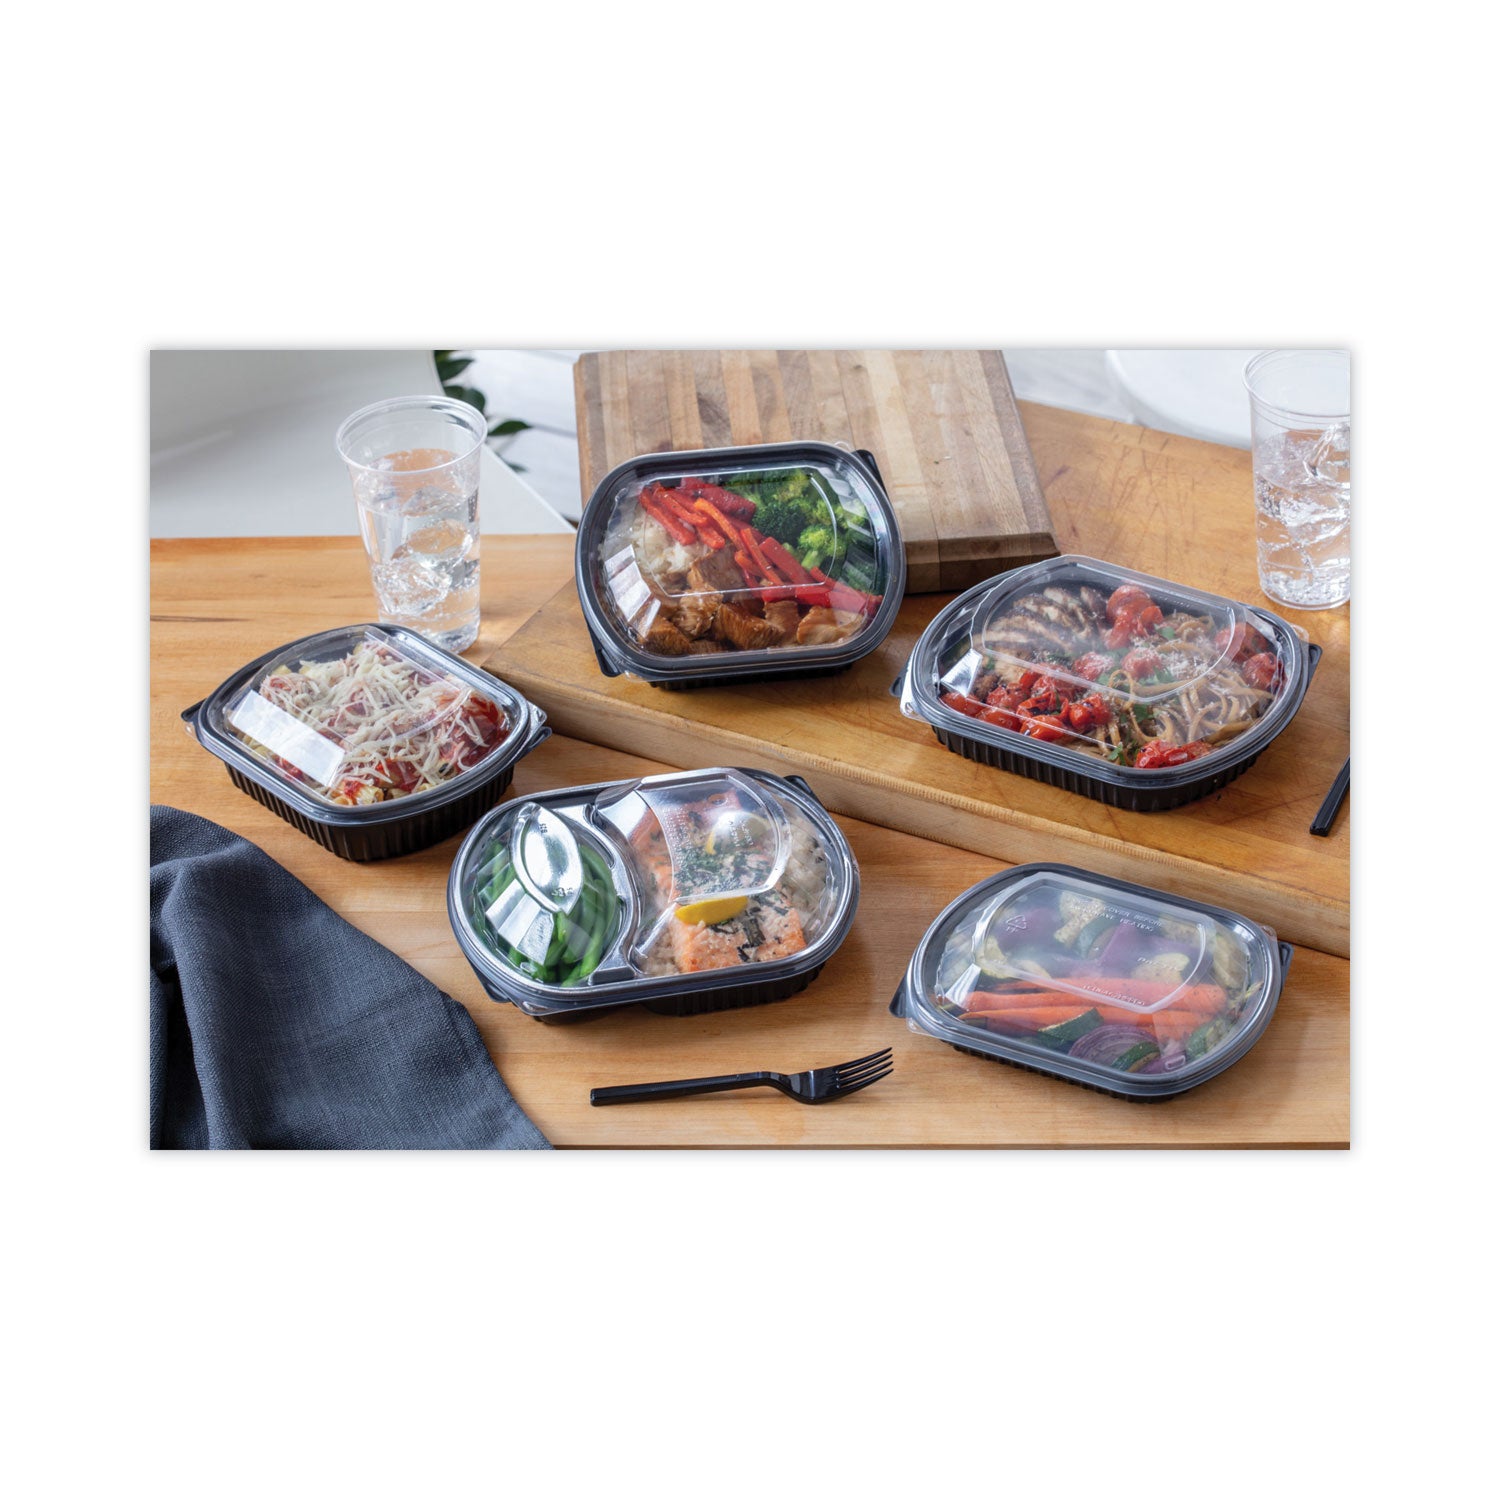 clearview-mealmaster-lid-with-fog-gard-coating-large-flat-lid-938-x-8-x-038-clear-plastic-300-carton_pctycn8463s00d0 - 3